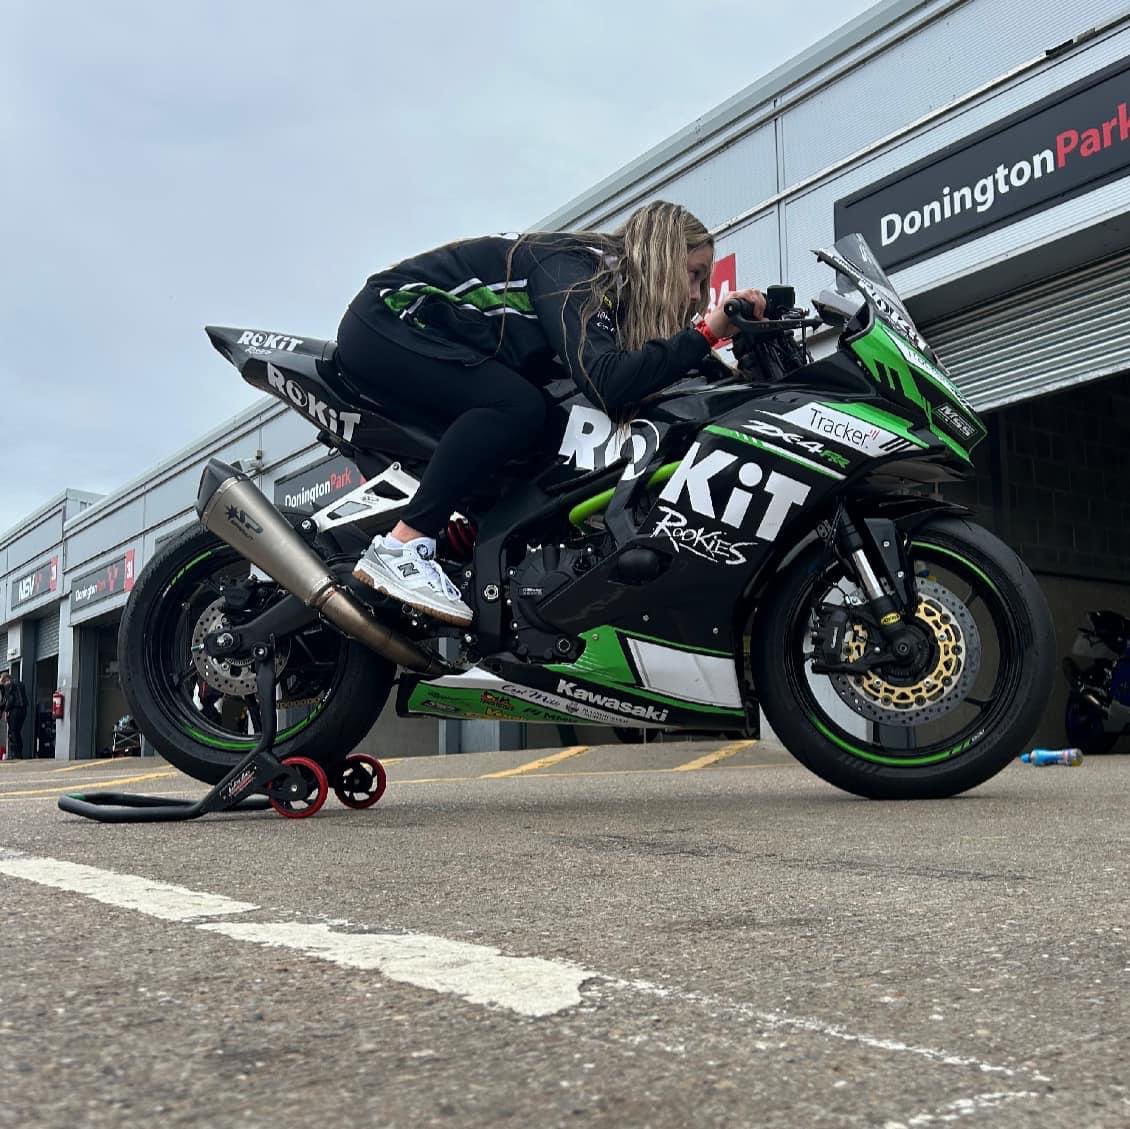 ⚠️2024 NEWS⚠️ Best kept secret😜 After a brilliant test yesterday on the Kawasaki 400 RR 1 am super happy to announce I will be riding for @rokit rookies the 2024 season. I want to thank Leon, Ron and Ann Haslam for this amazing opportunity and all the help yesterday getting the